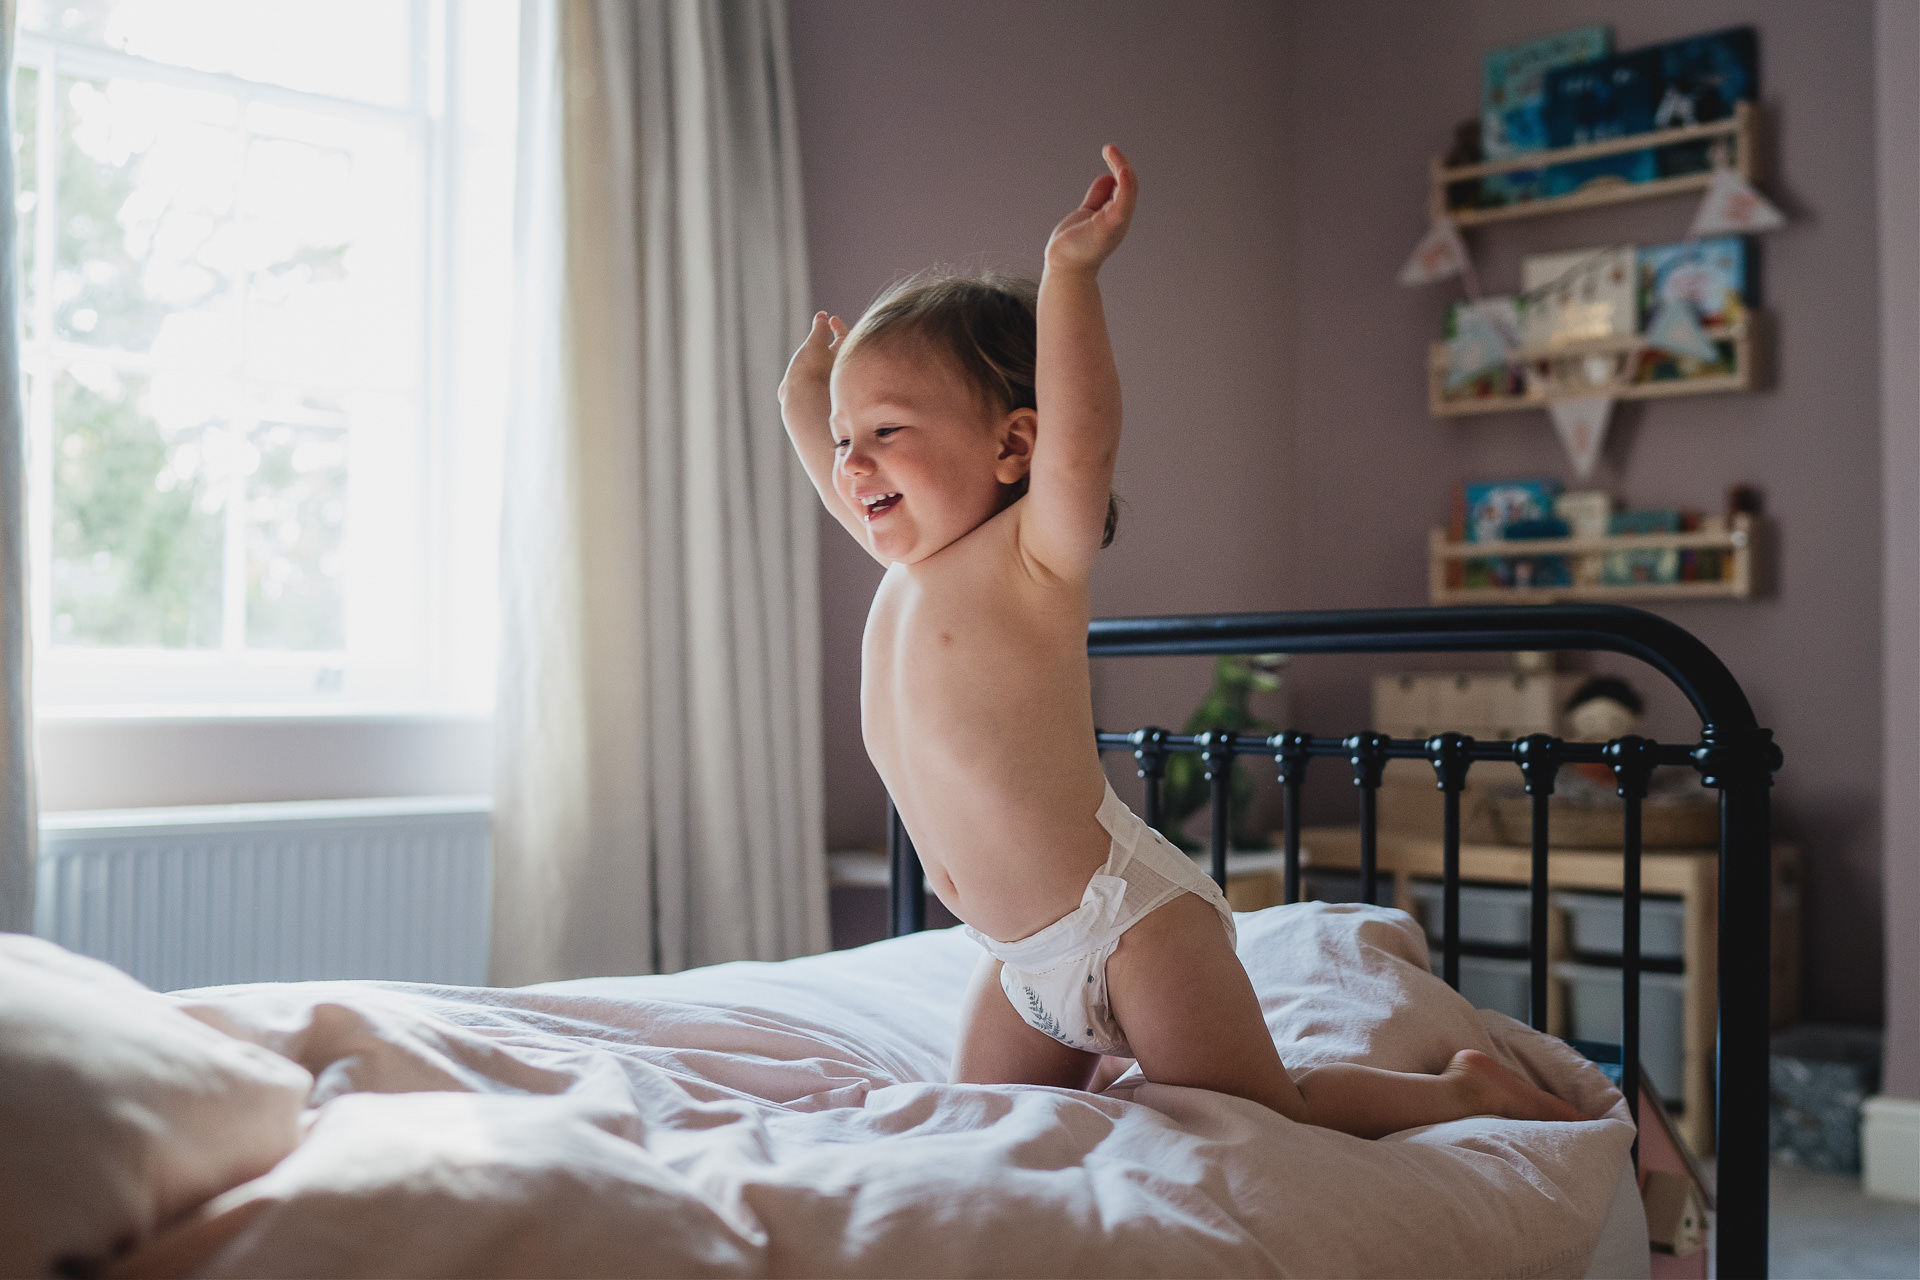 A toddler leaping onto a bed